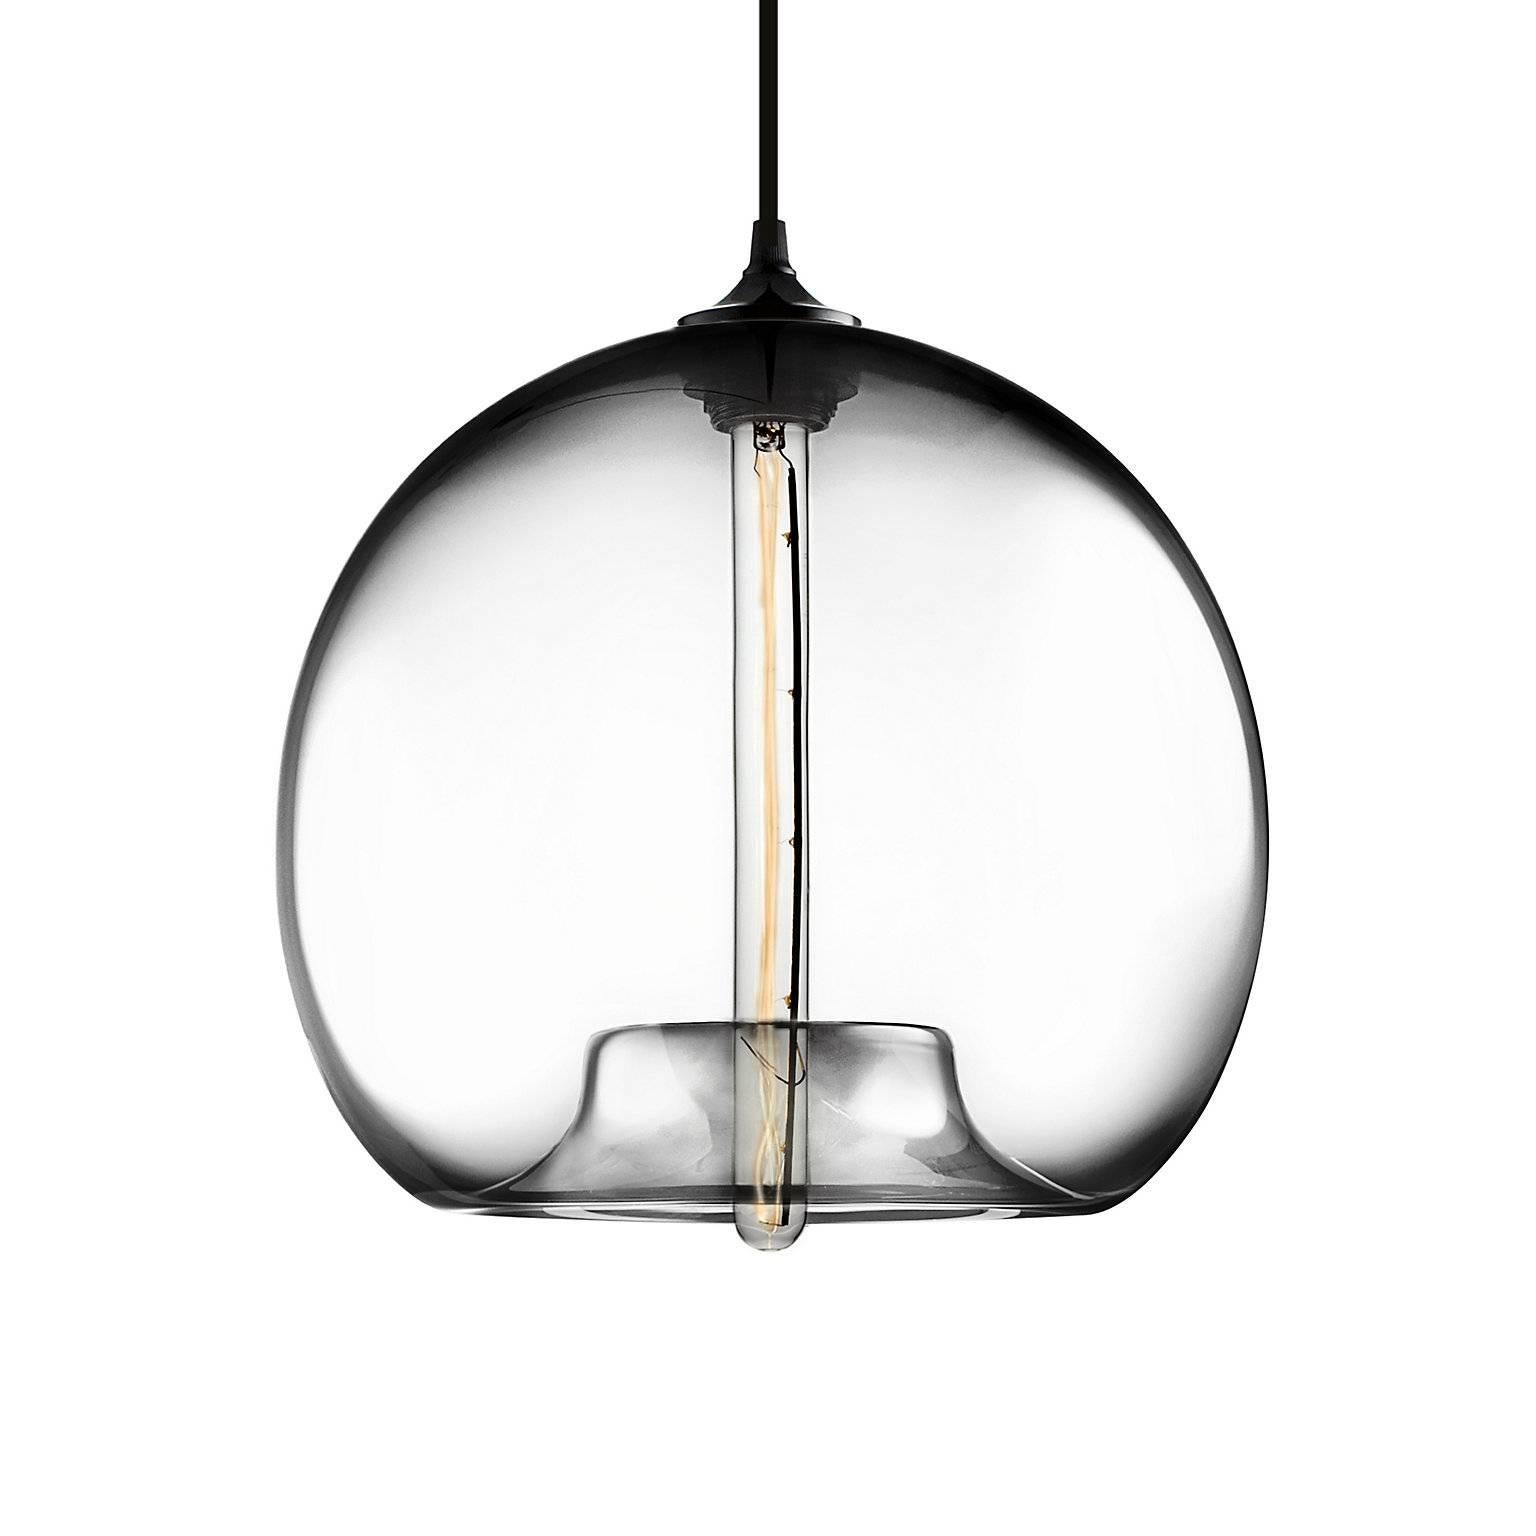 The first design that inspired Niche, the Stamen pendant boasts a voluptuous body that tucks into itself unexpectedly. Every single glass pendant light that comes from Niche is hand-blown by real human beings in a state-of-the-art studio located in